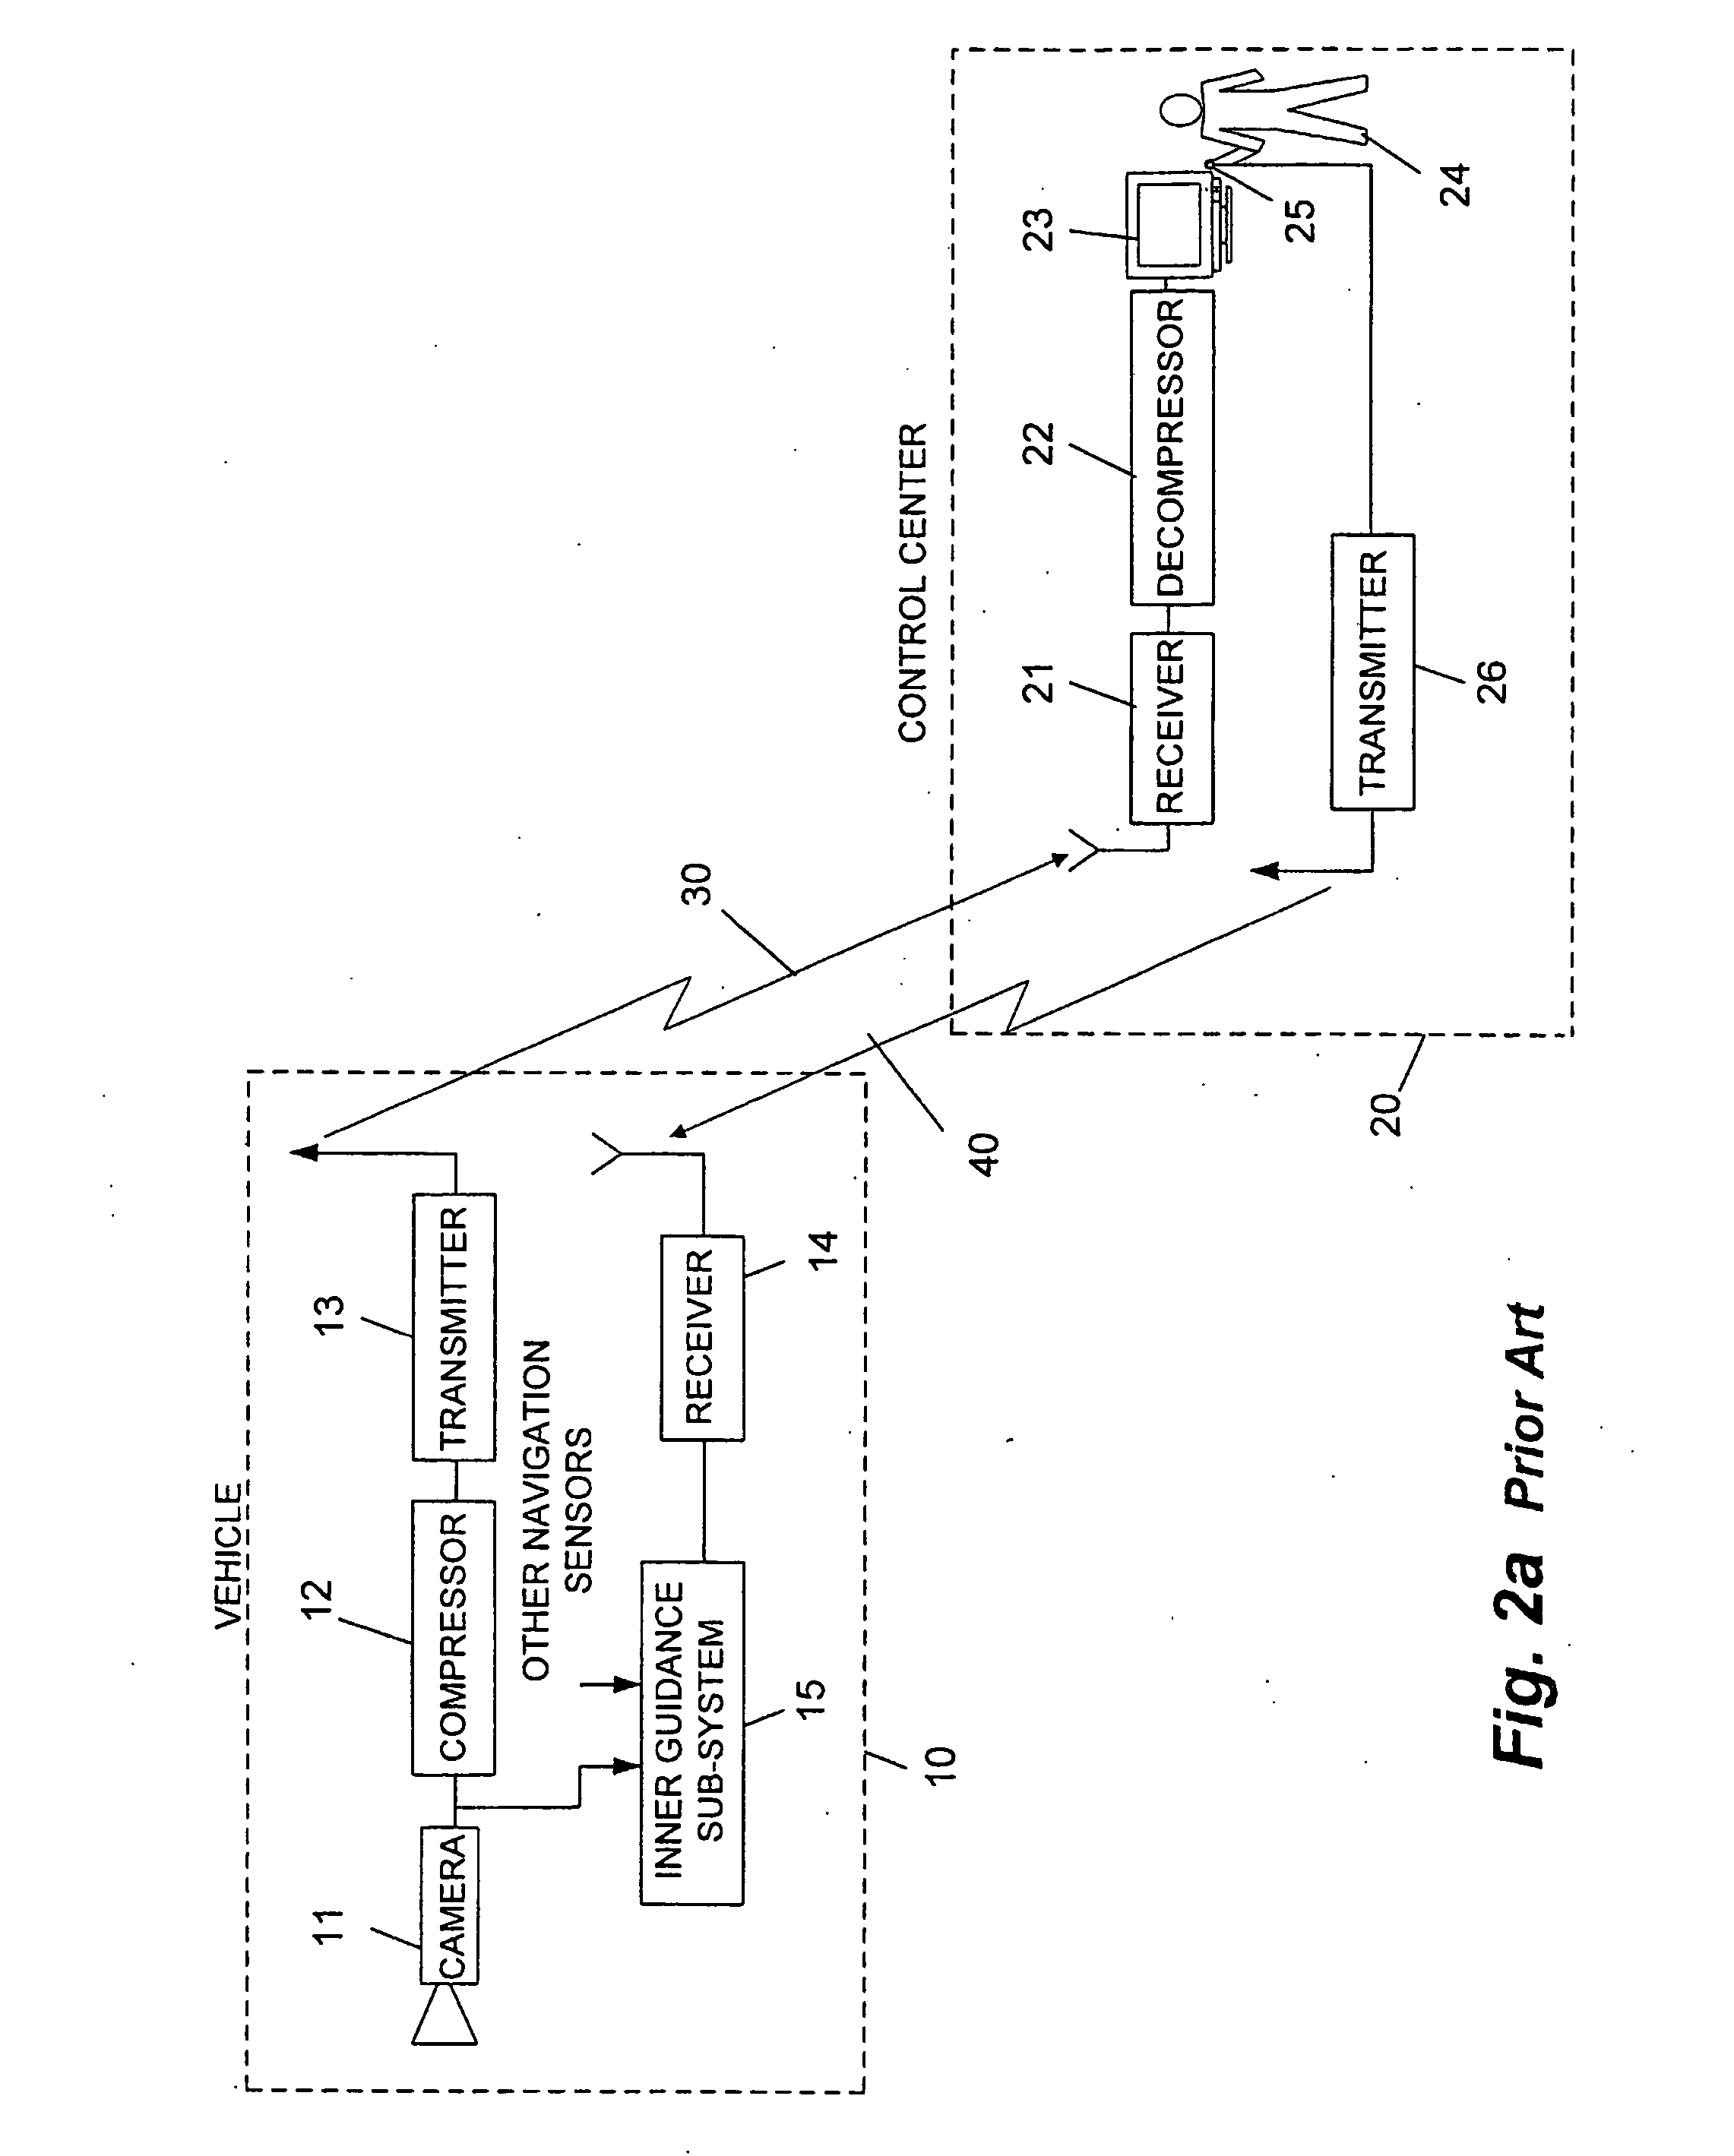 Method and system for guiding a remote vehicle via lagged communication channel